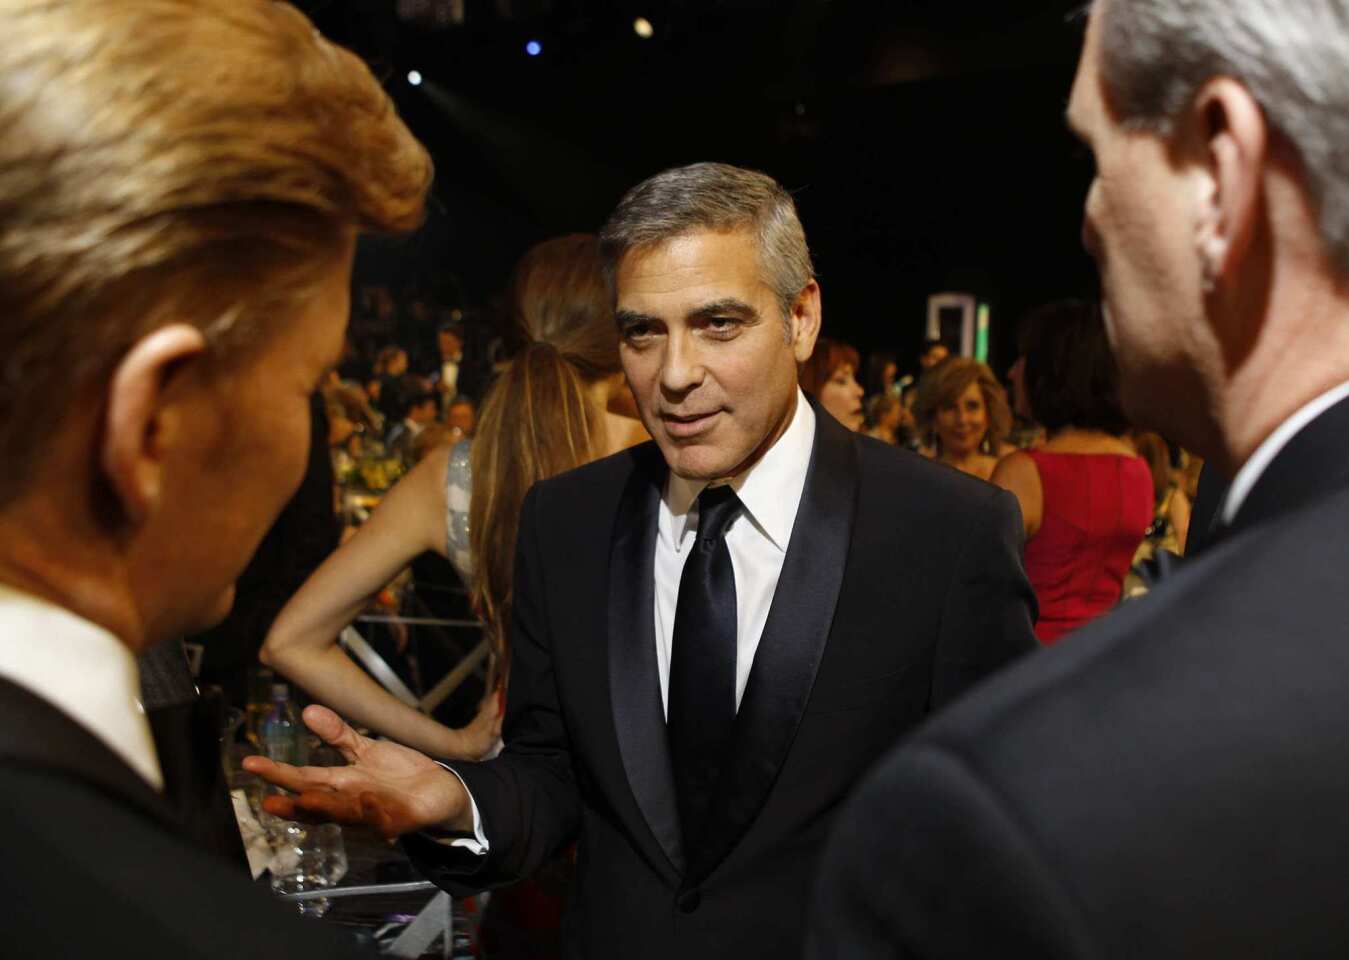 "The Descendants" actor George Clooney chats with onlookers during the show.